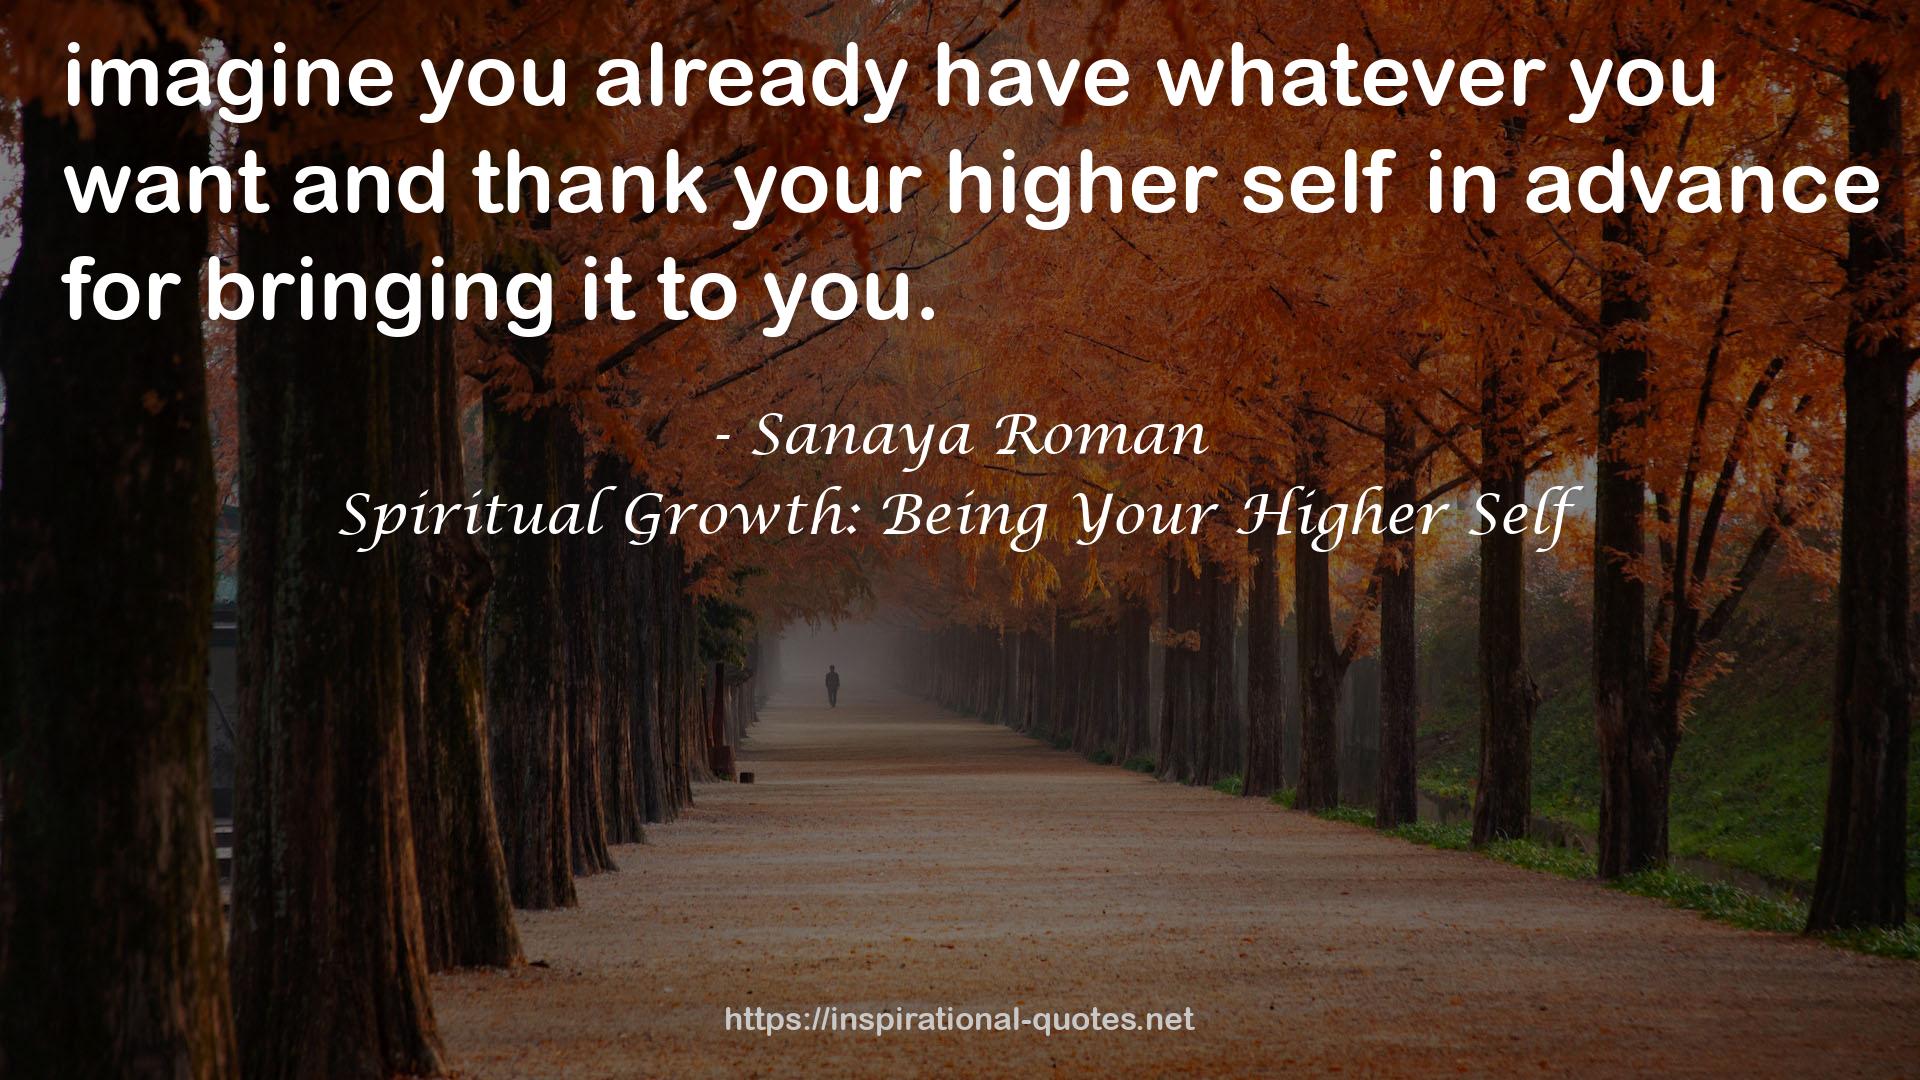 Spiritual Growth: Being Your Higher Self QUOTES